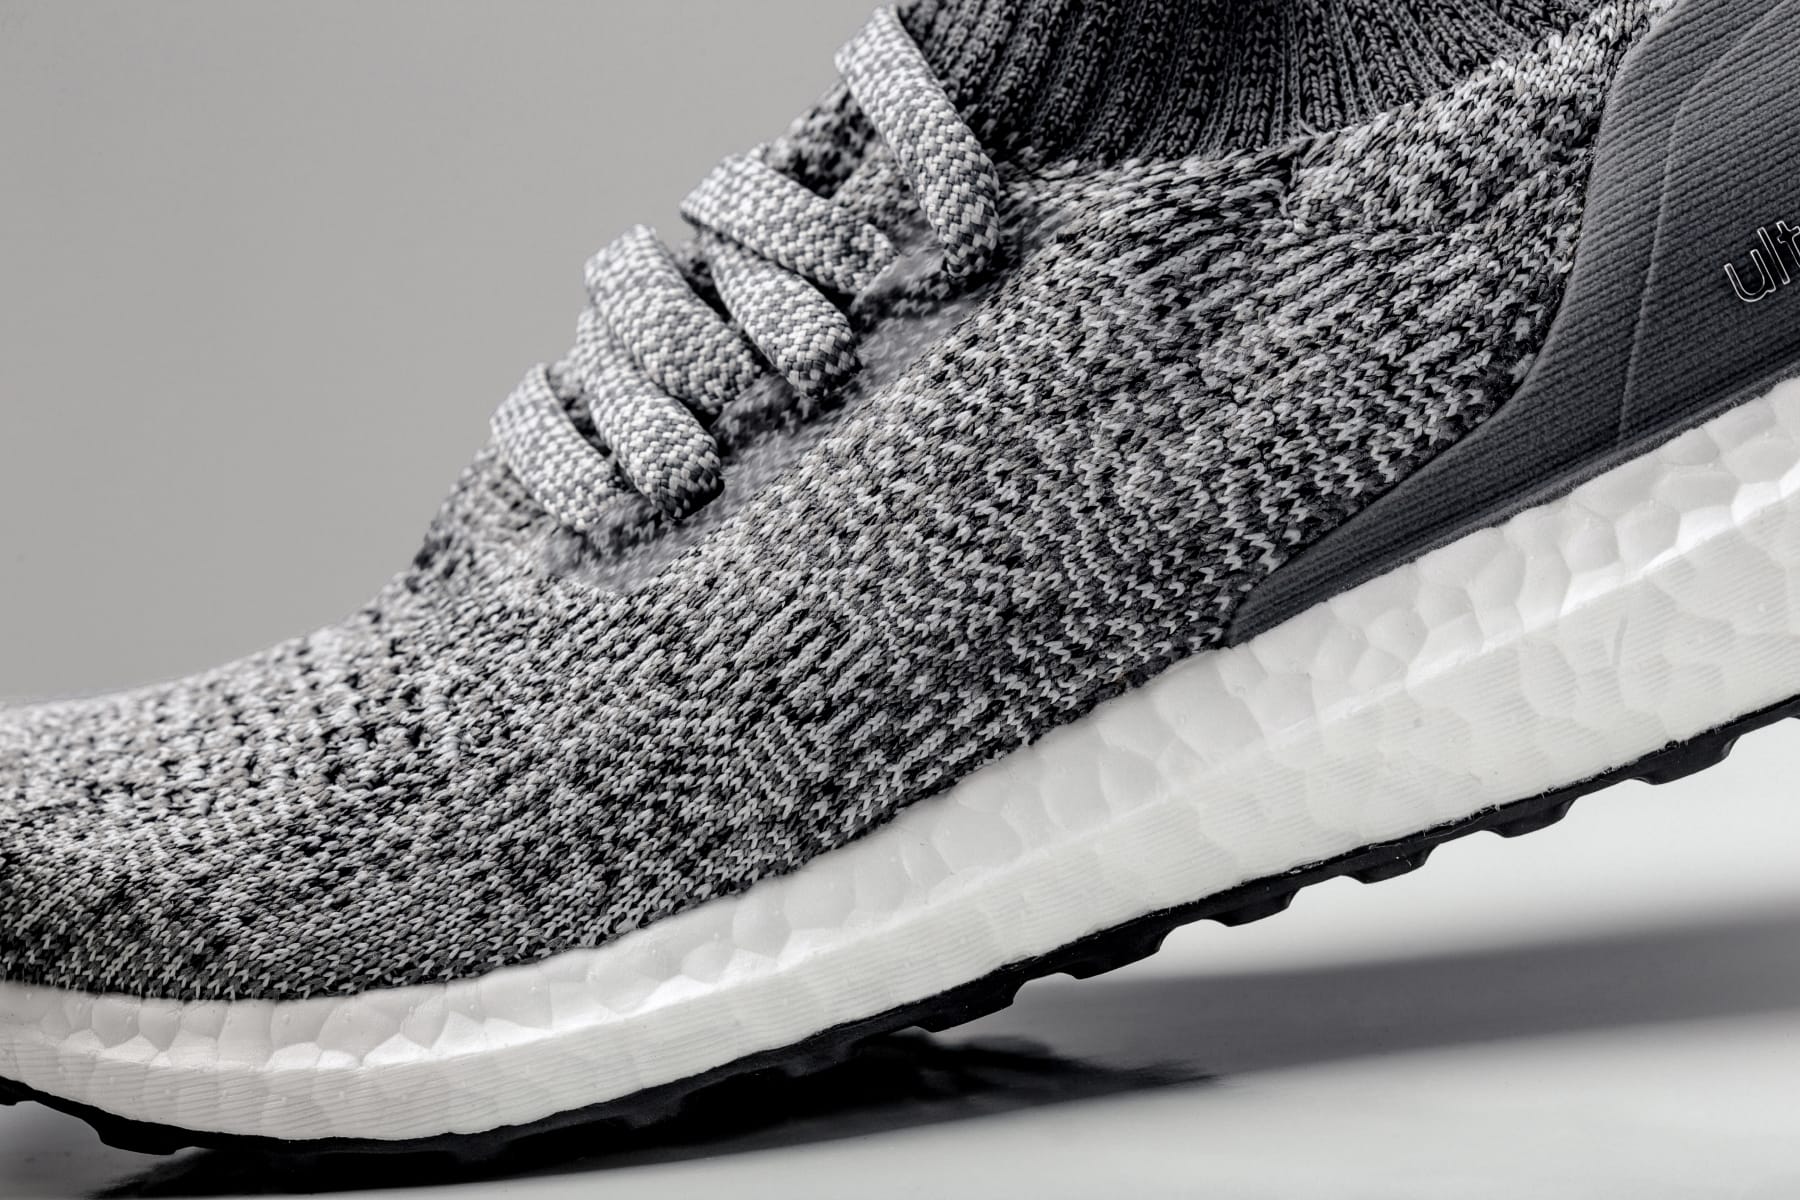 ultra boost uncaged 4.0